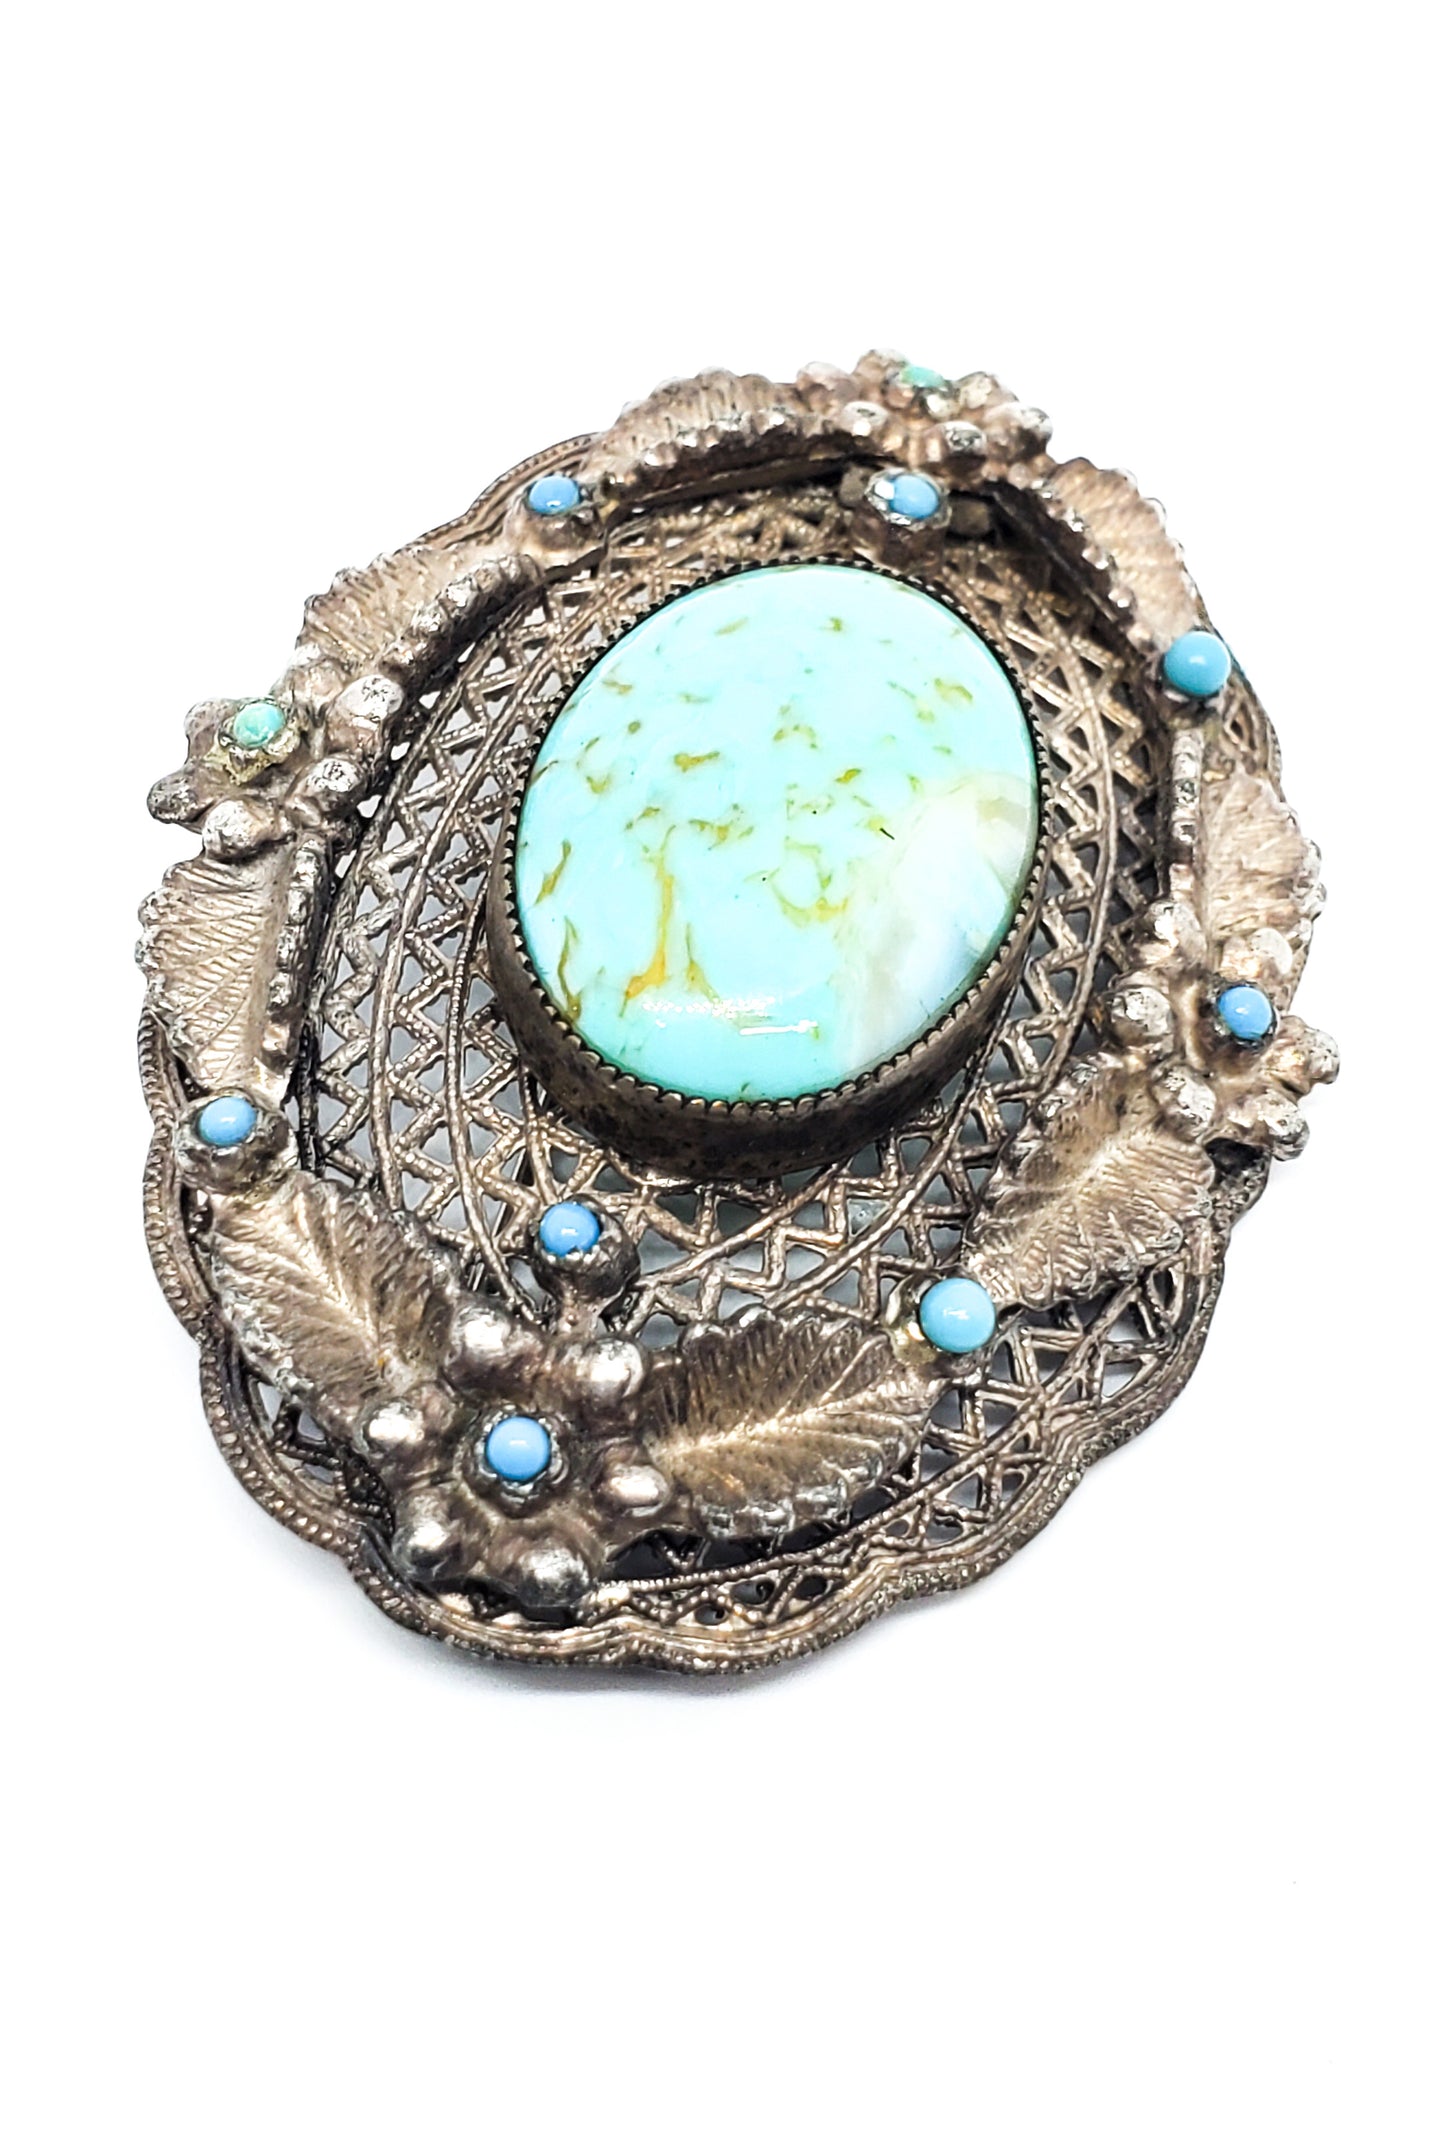 Antique Old Pawn turquoise and glass cab sterling silver artisan brooch